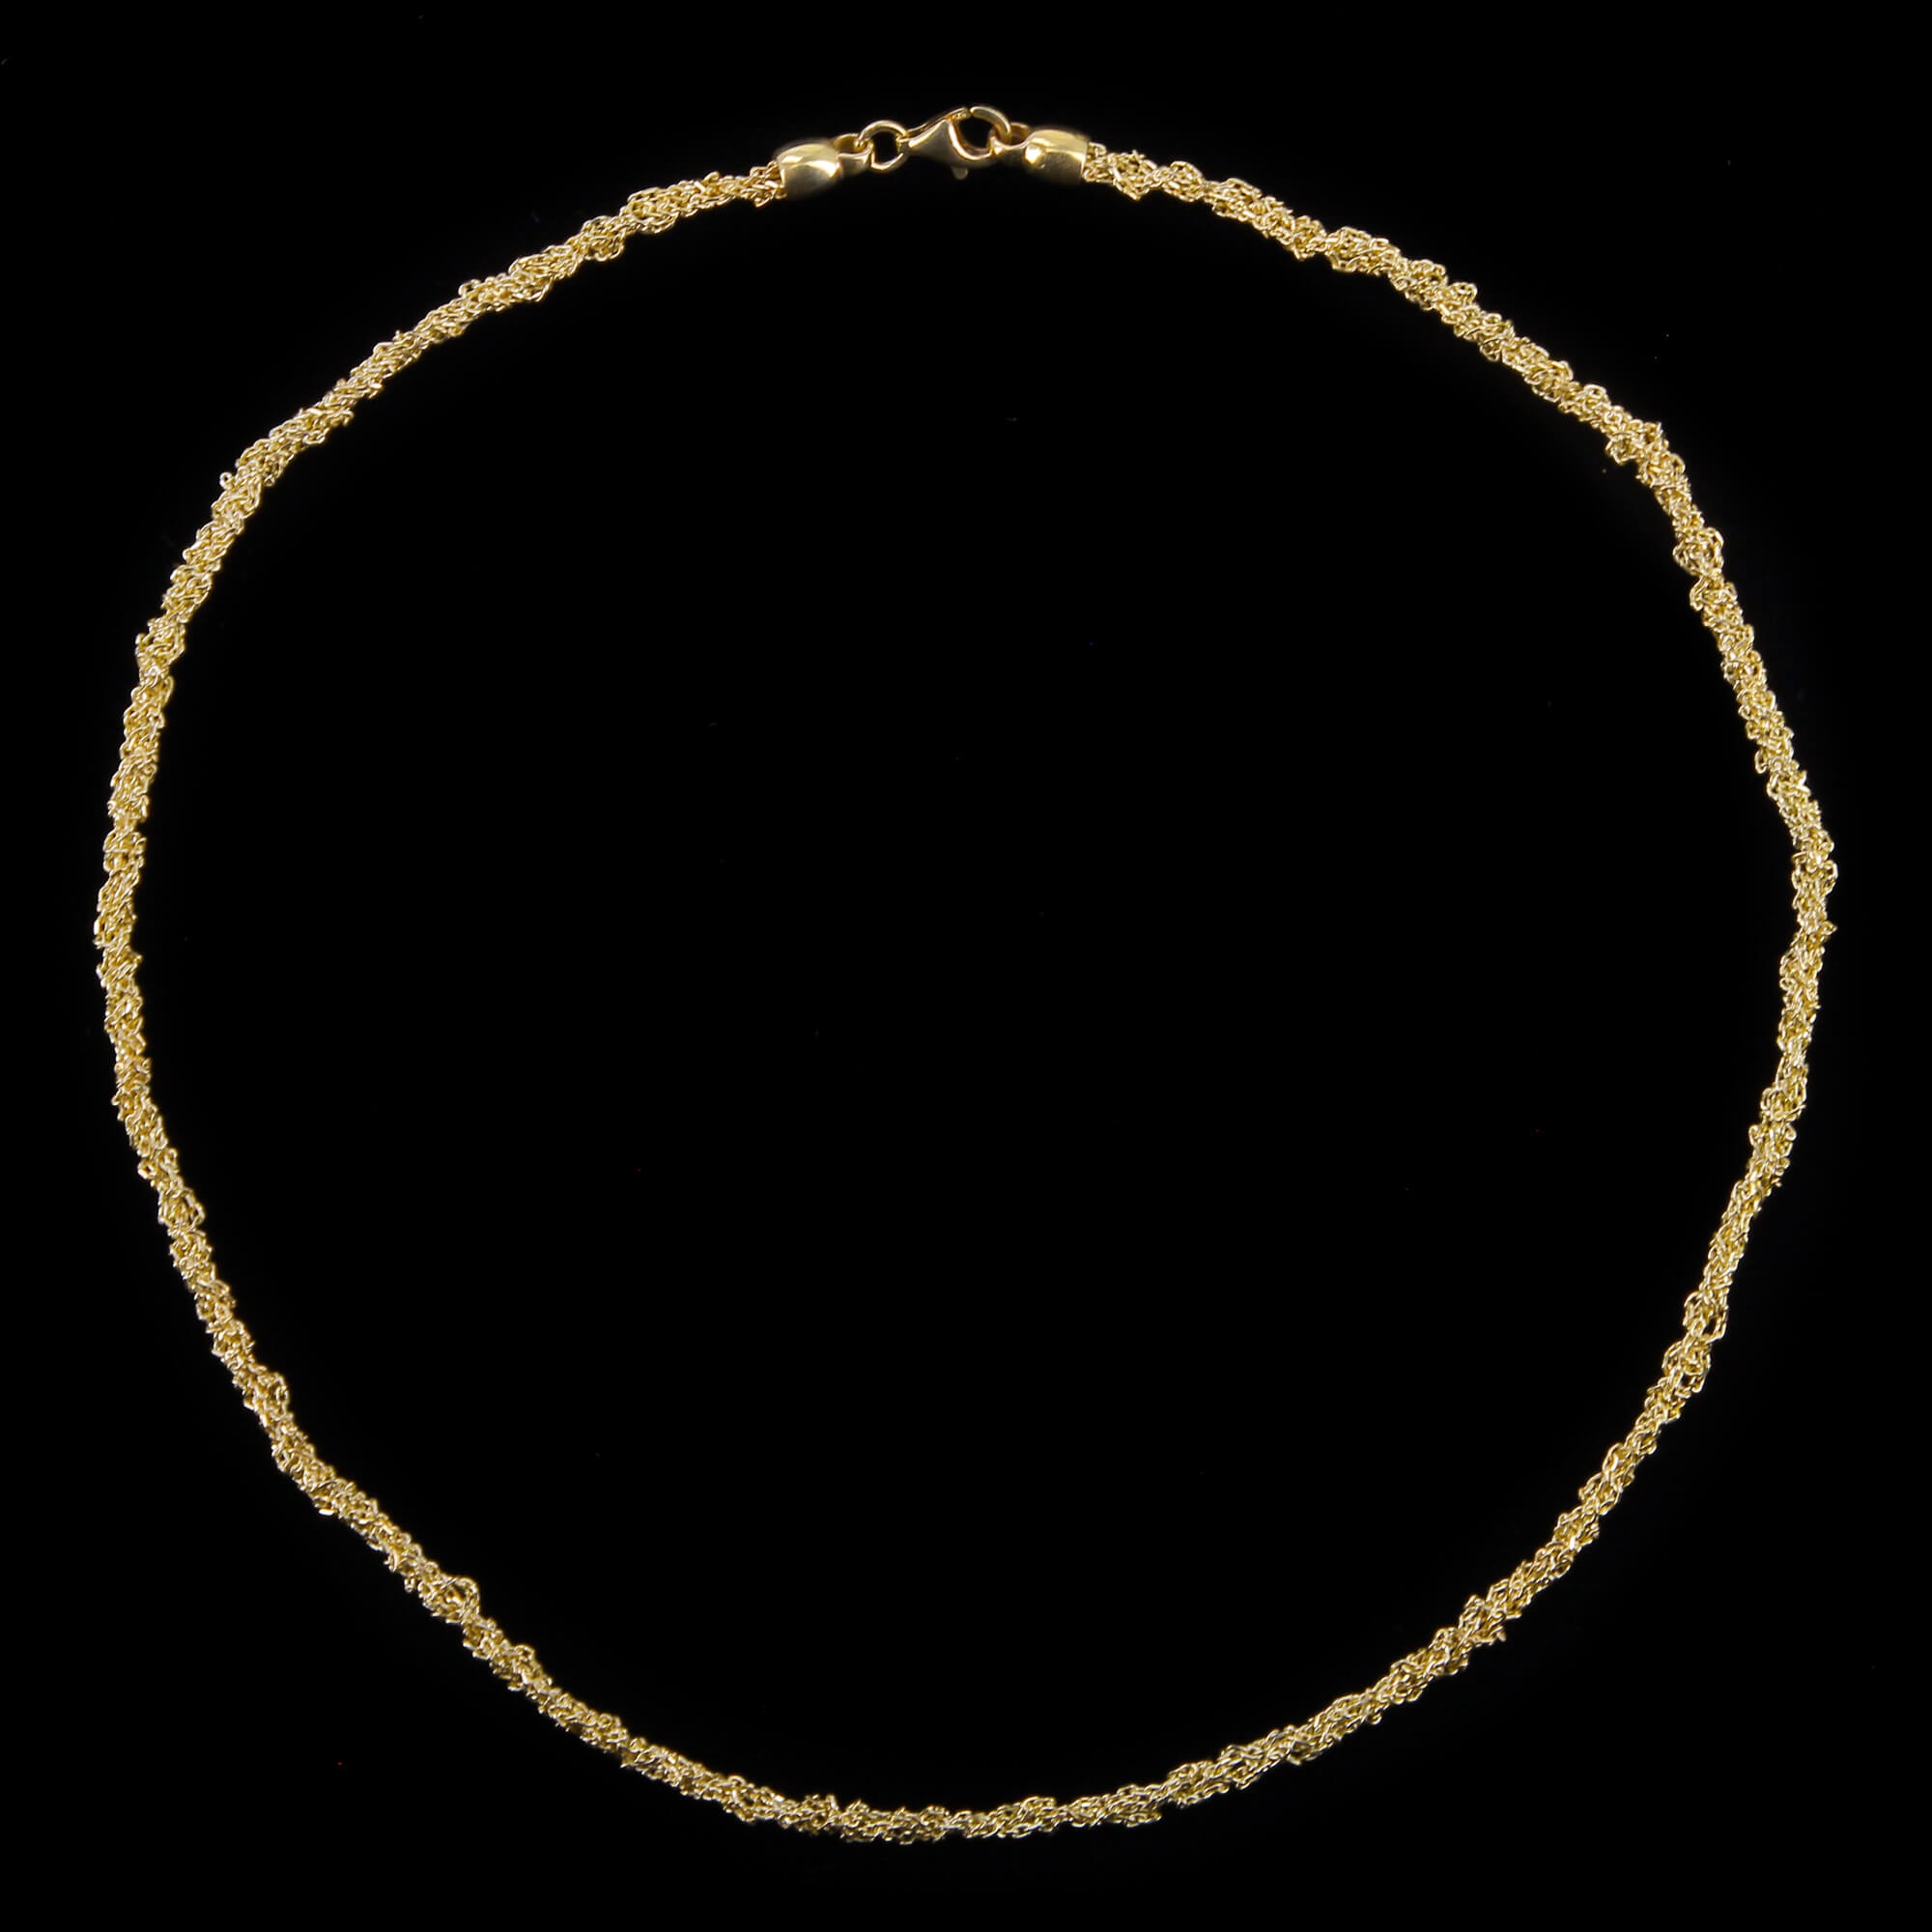 Short interwoven silver gold plated necklace